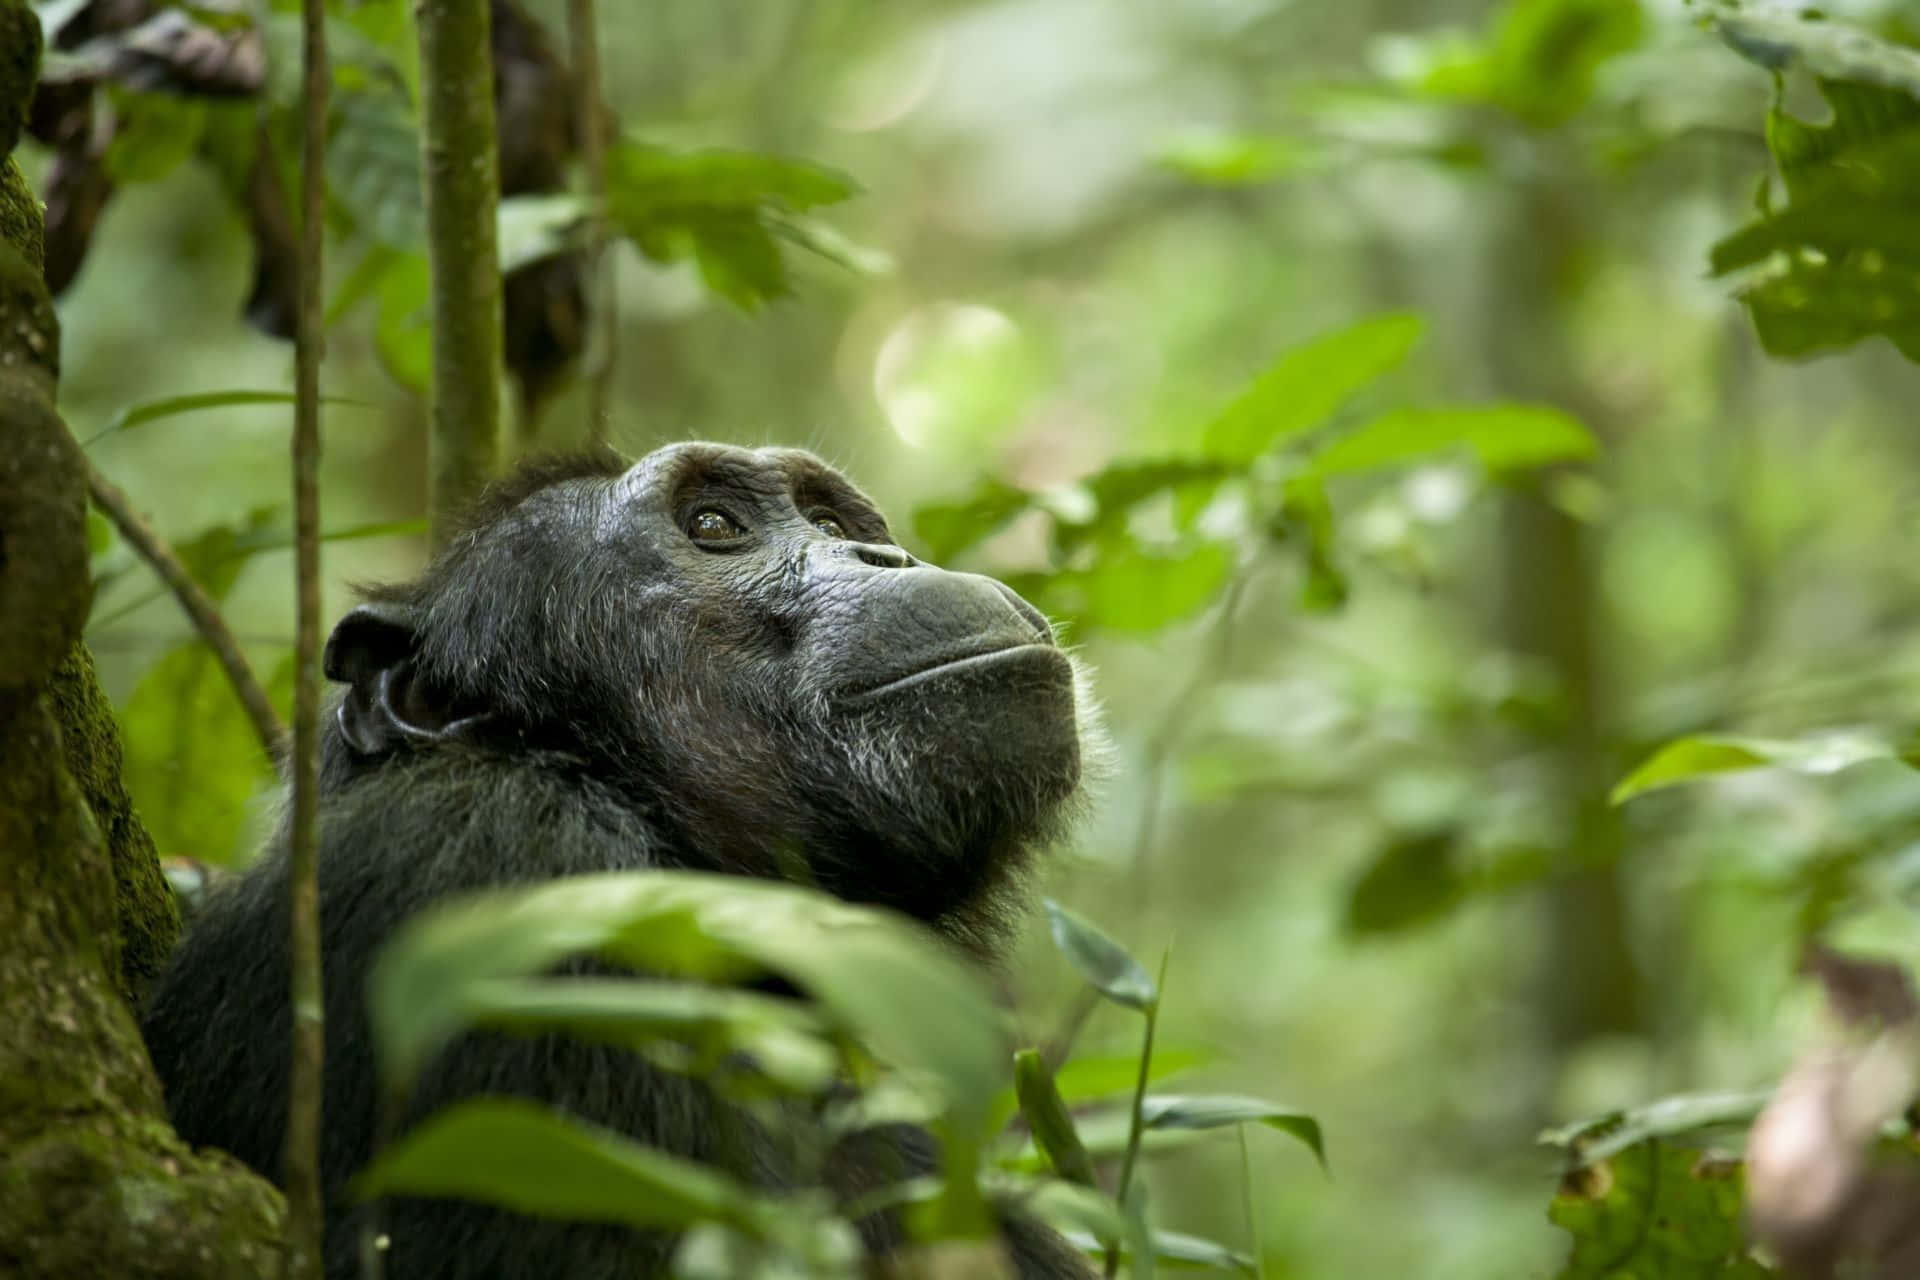 A curious looking chimpanzee, closely watching its surroundings.